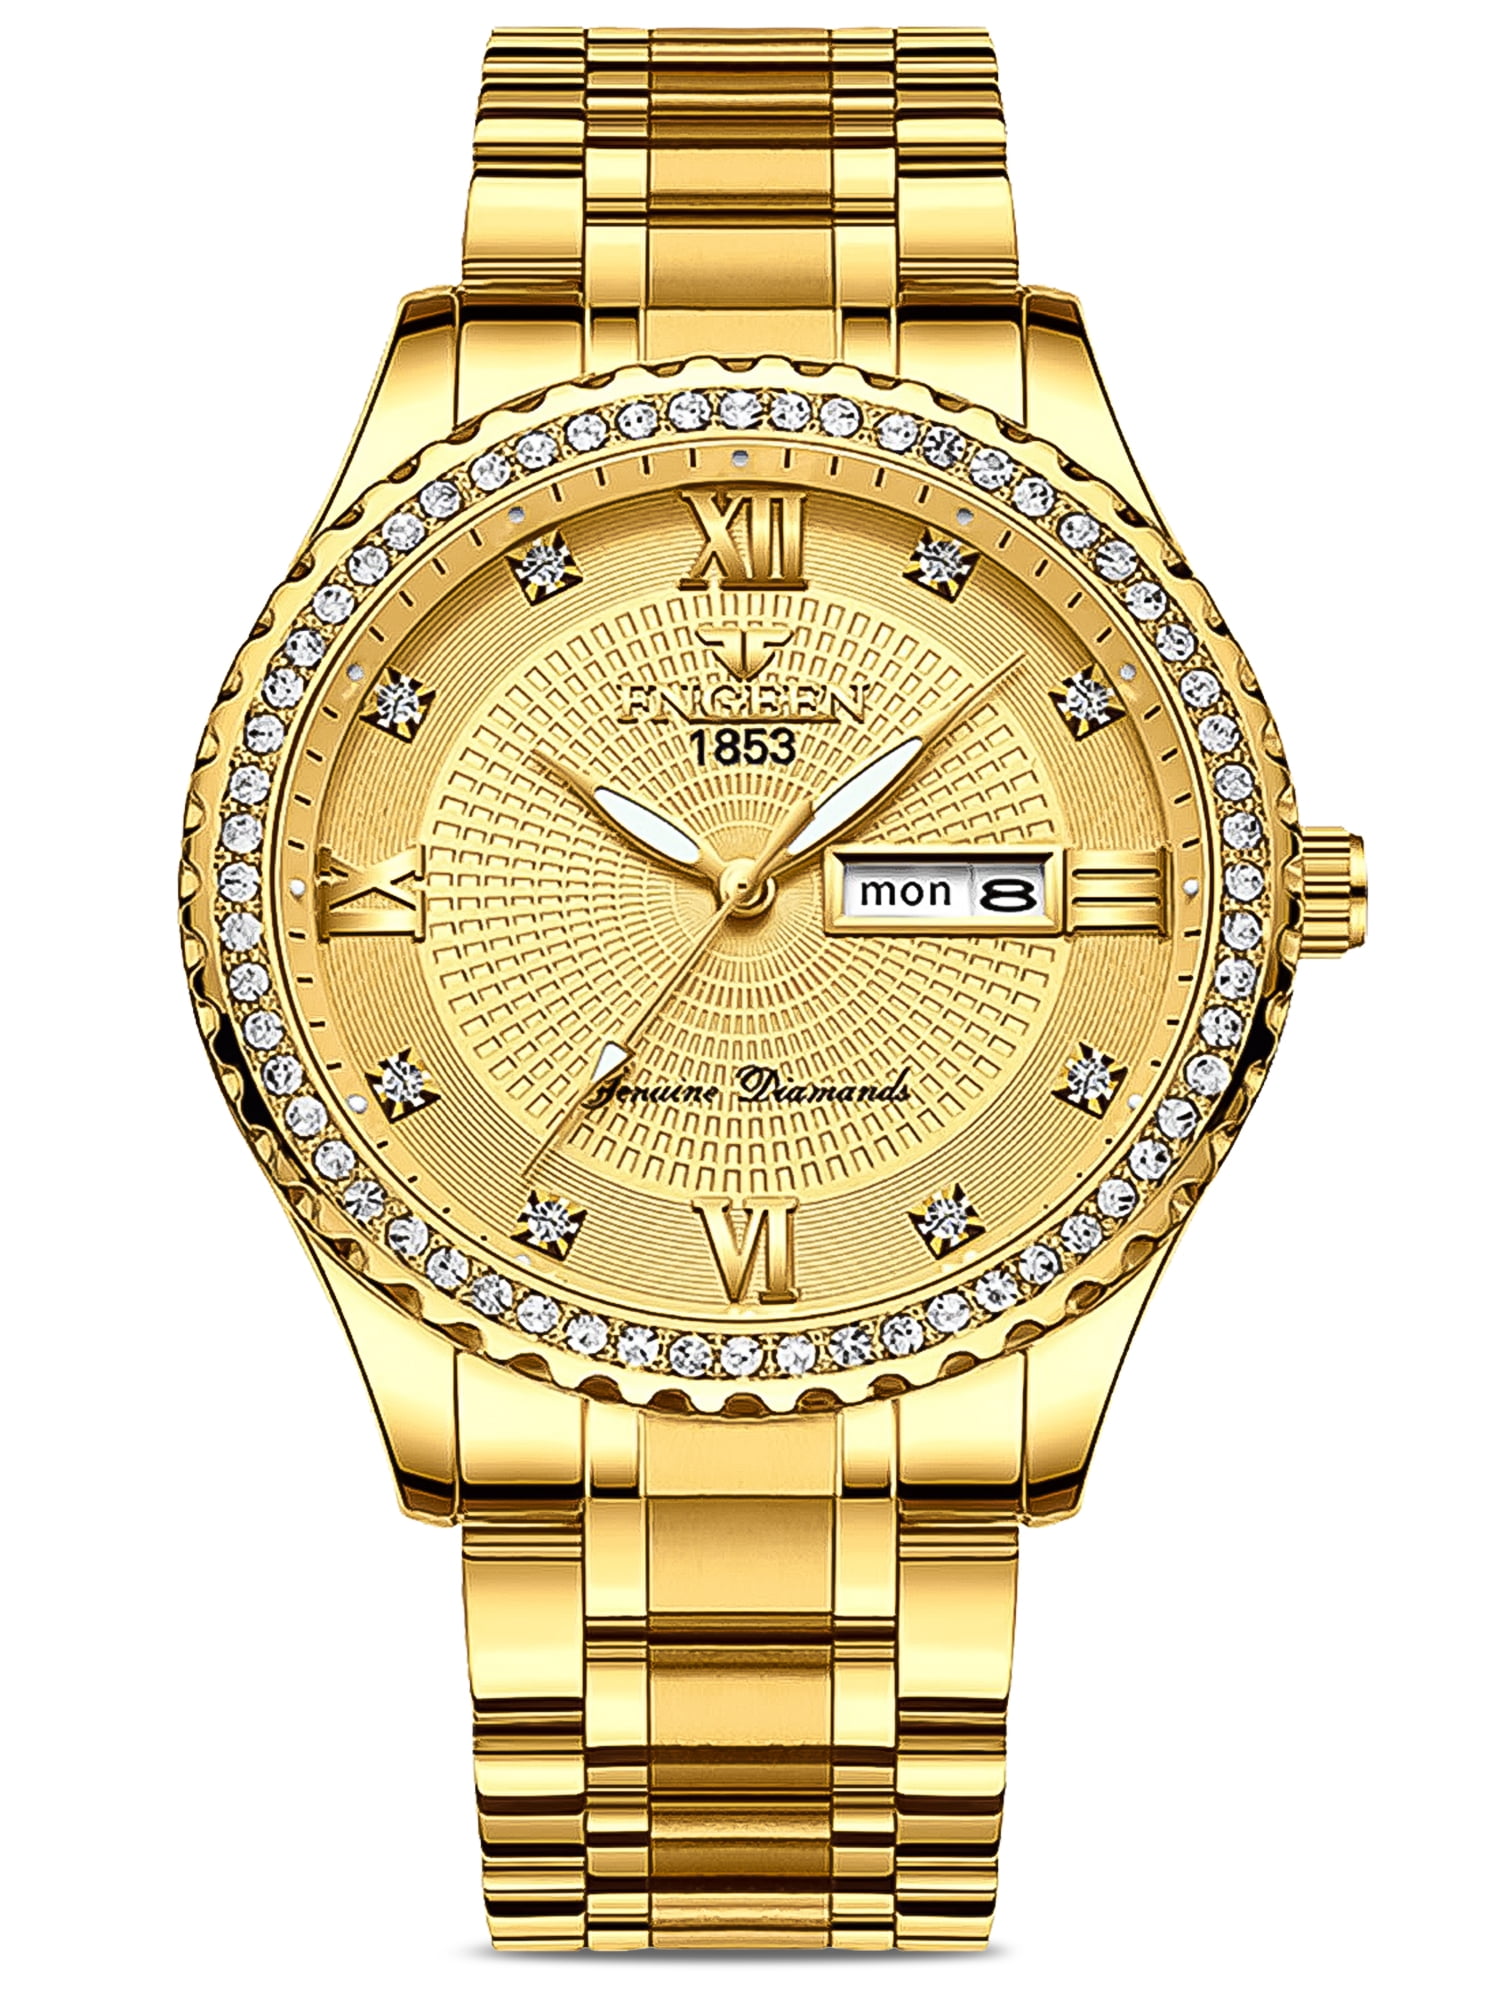 Mesh Onyx - Classic gold watch with black dial | DW-sonthuy.vn